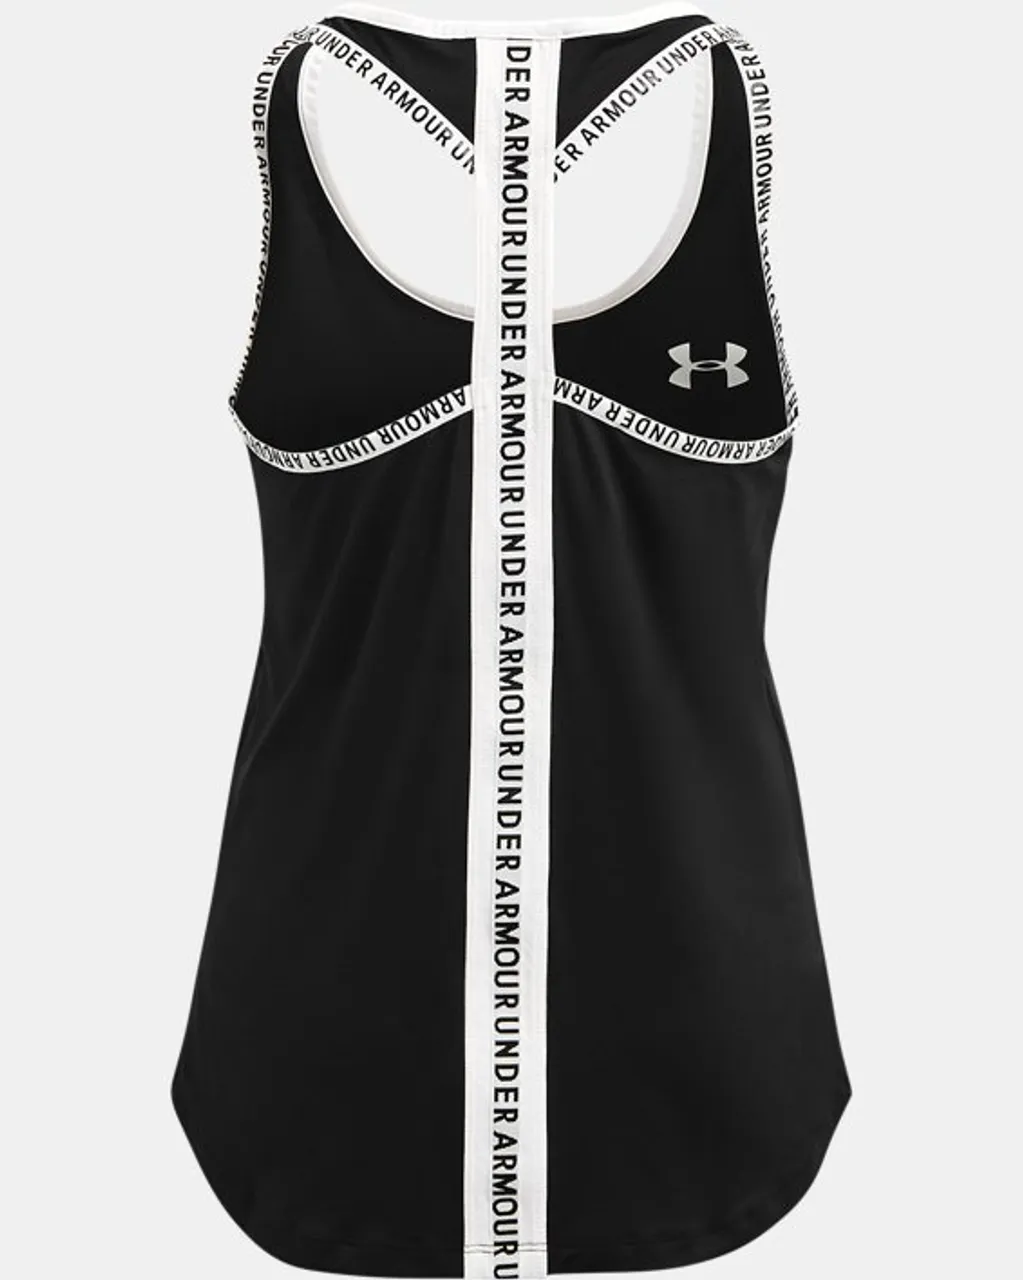 Girls'  Under Armour  Knockout Tank Black / White YLG (59 - 63 in)